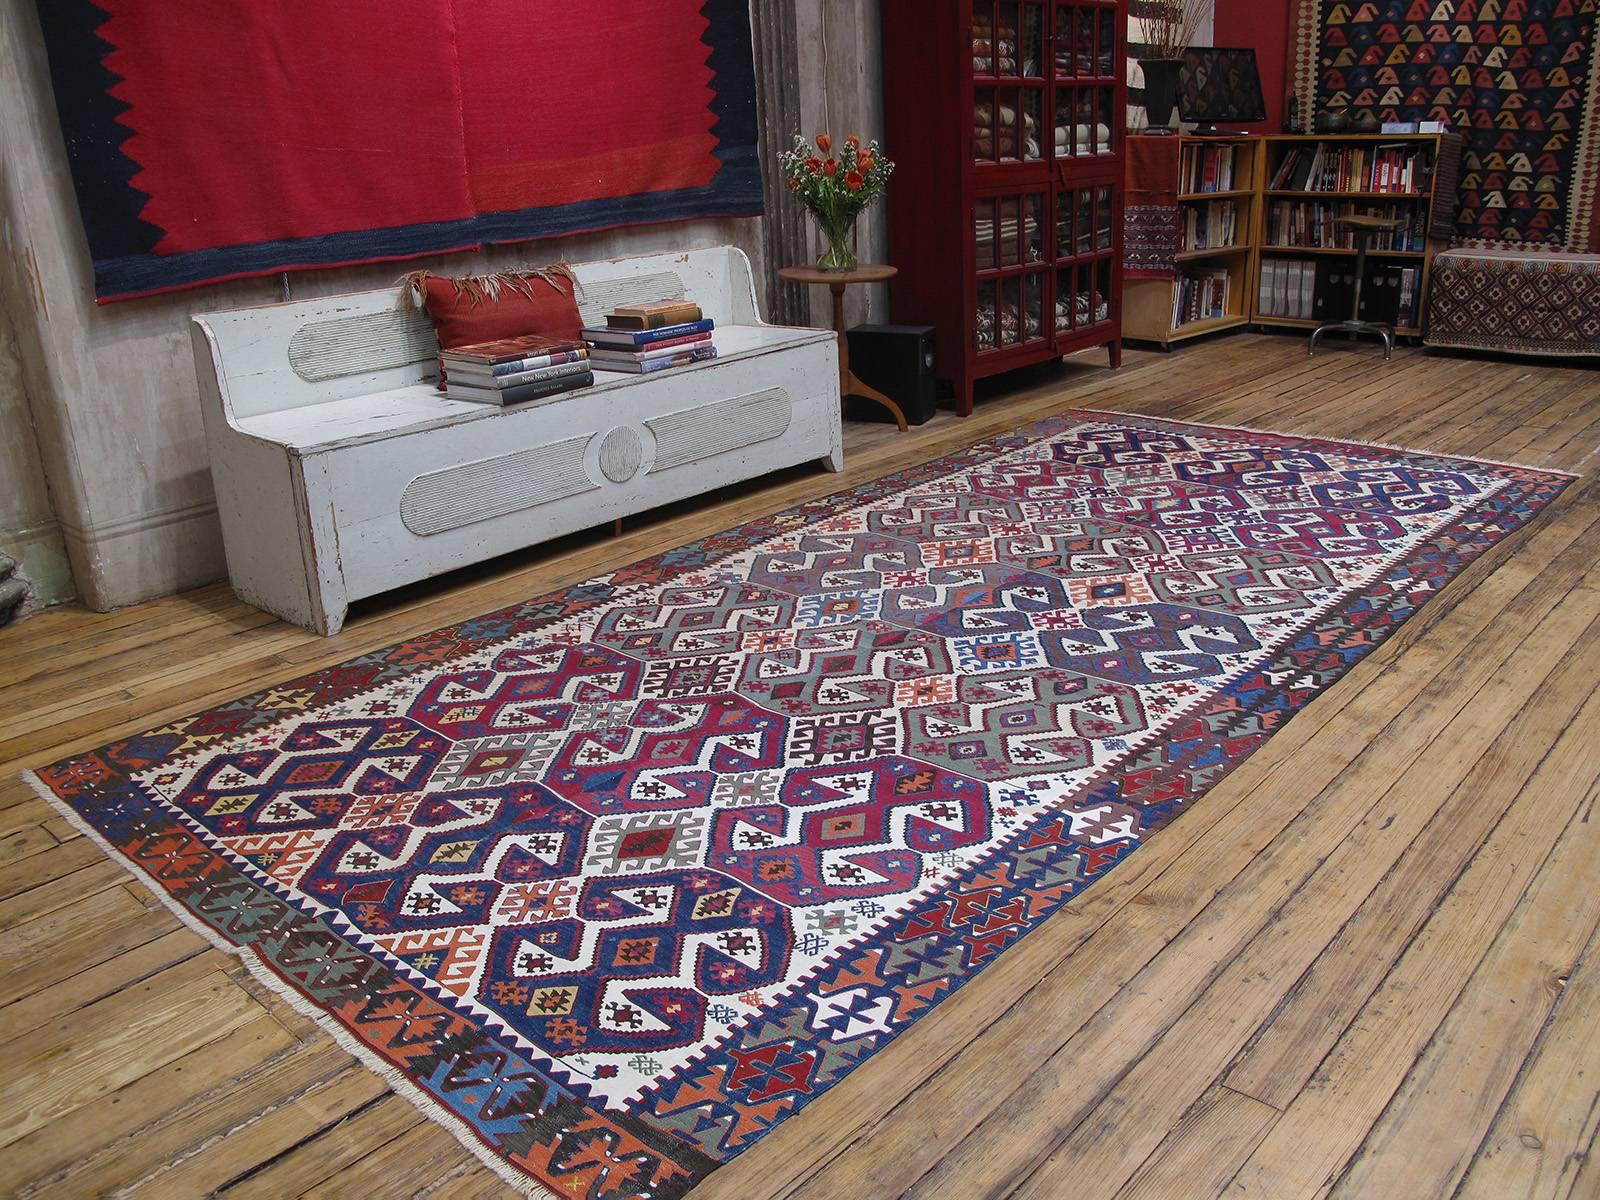 Antique Aksaray Kilim rug. An impressive example of Anatolian Kilim rug tradition from Central Turkey. Powerful design with great use of positive/negative interplay. Rug is woven in two symmetric halves which is a typical feature of these types of